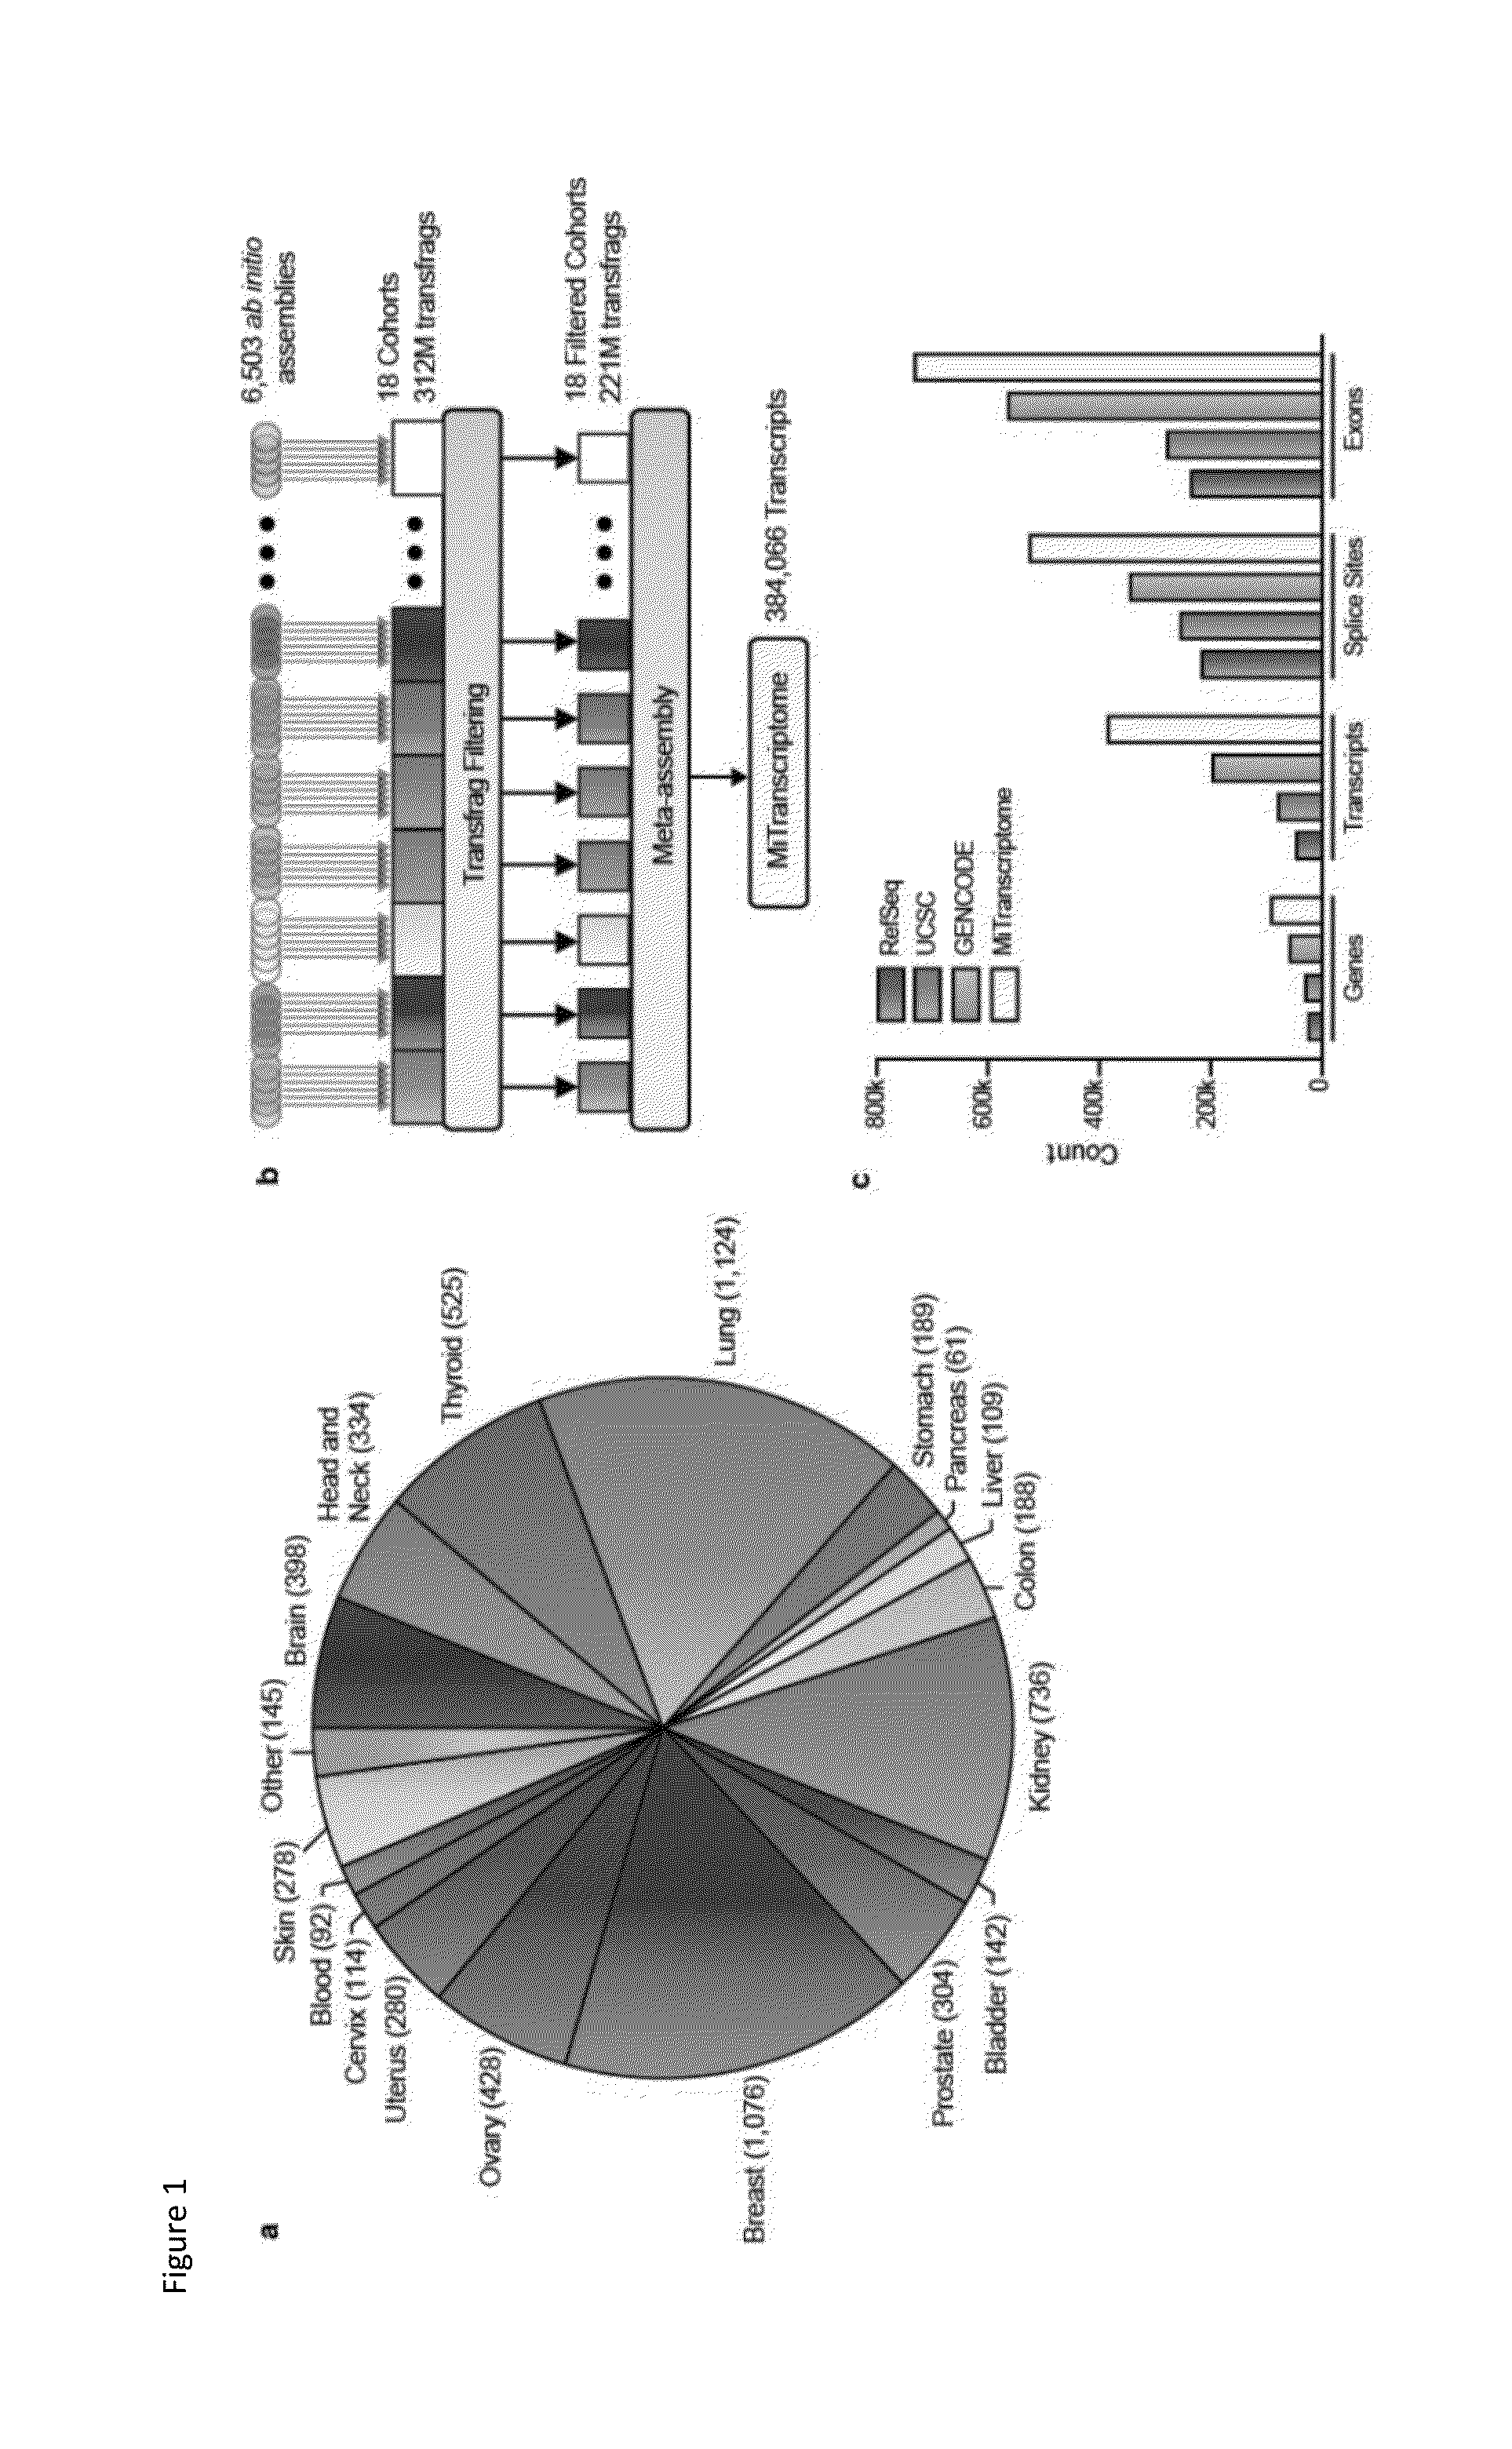 Non-coding rnas and uses thereof